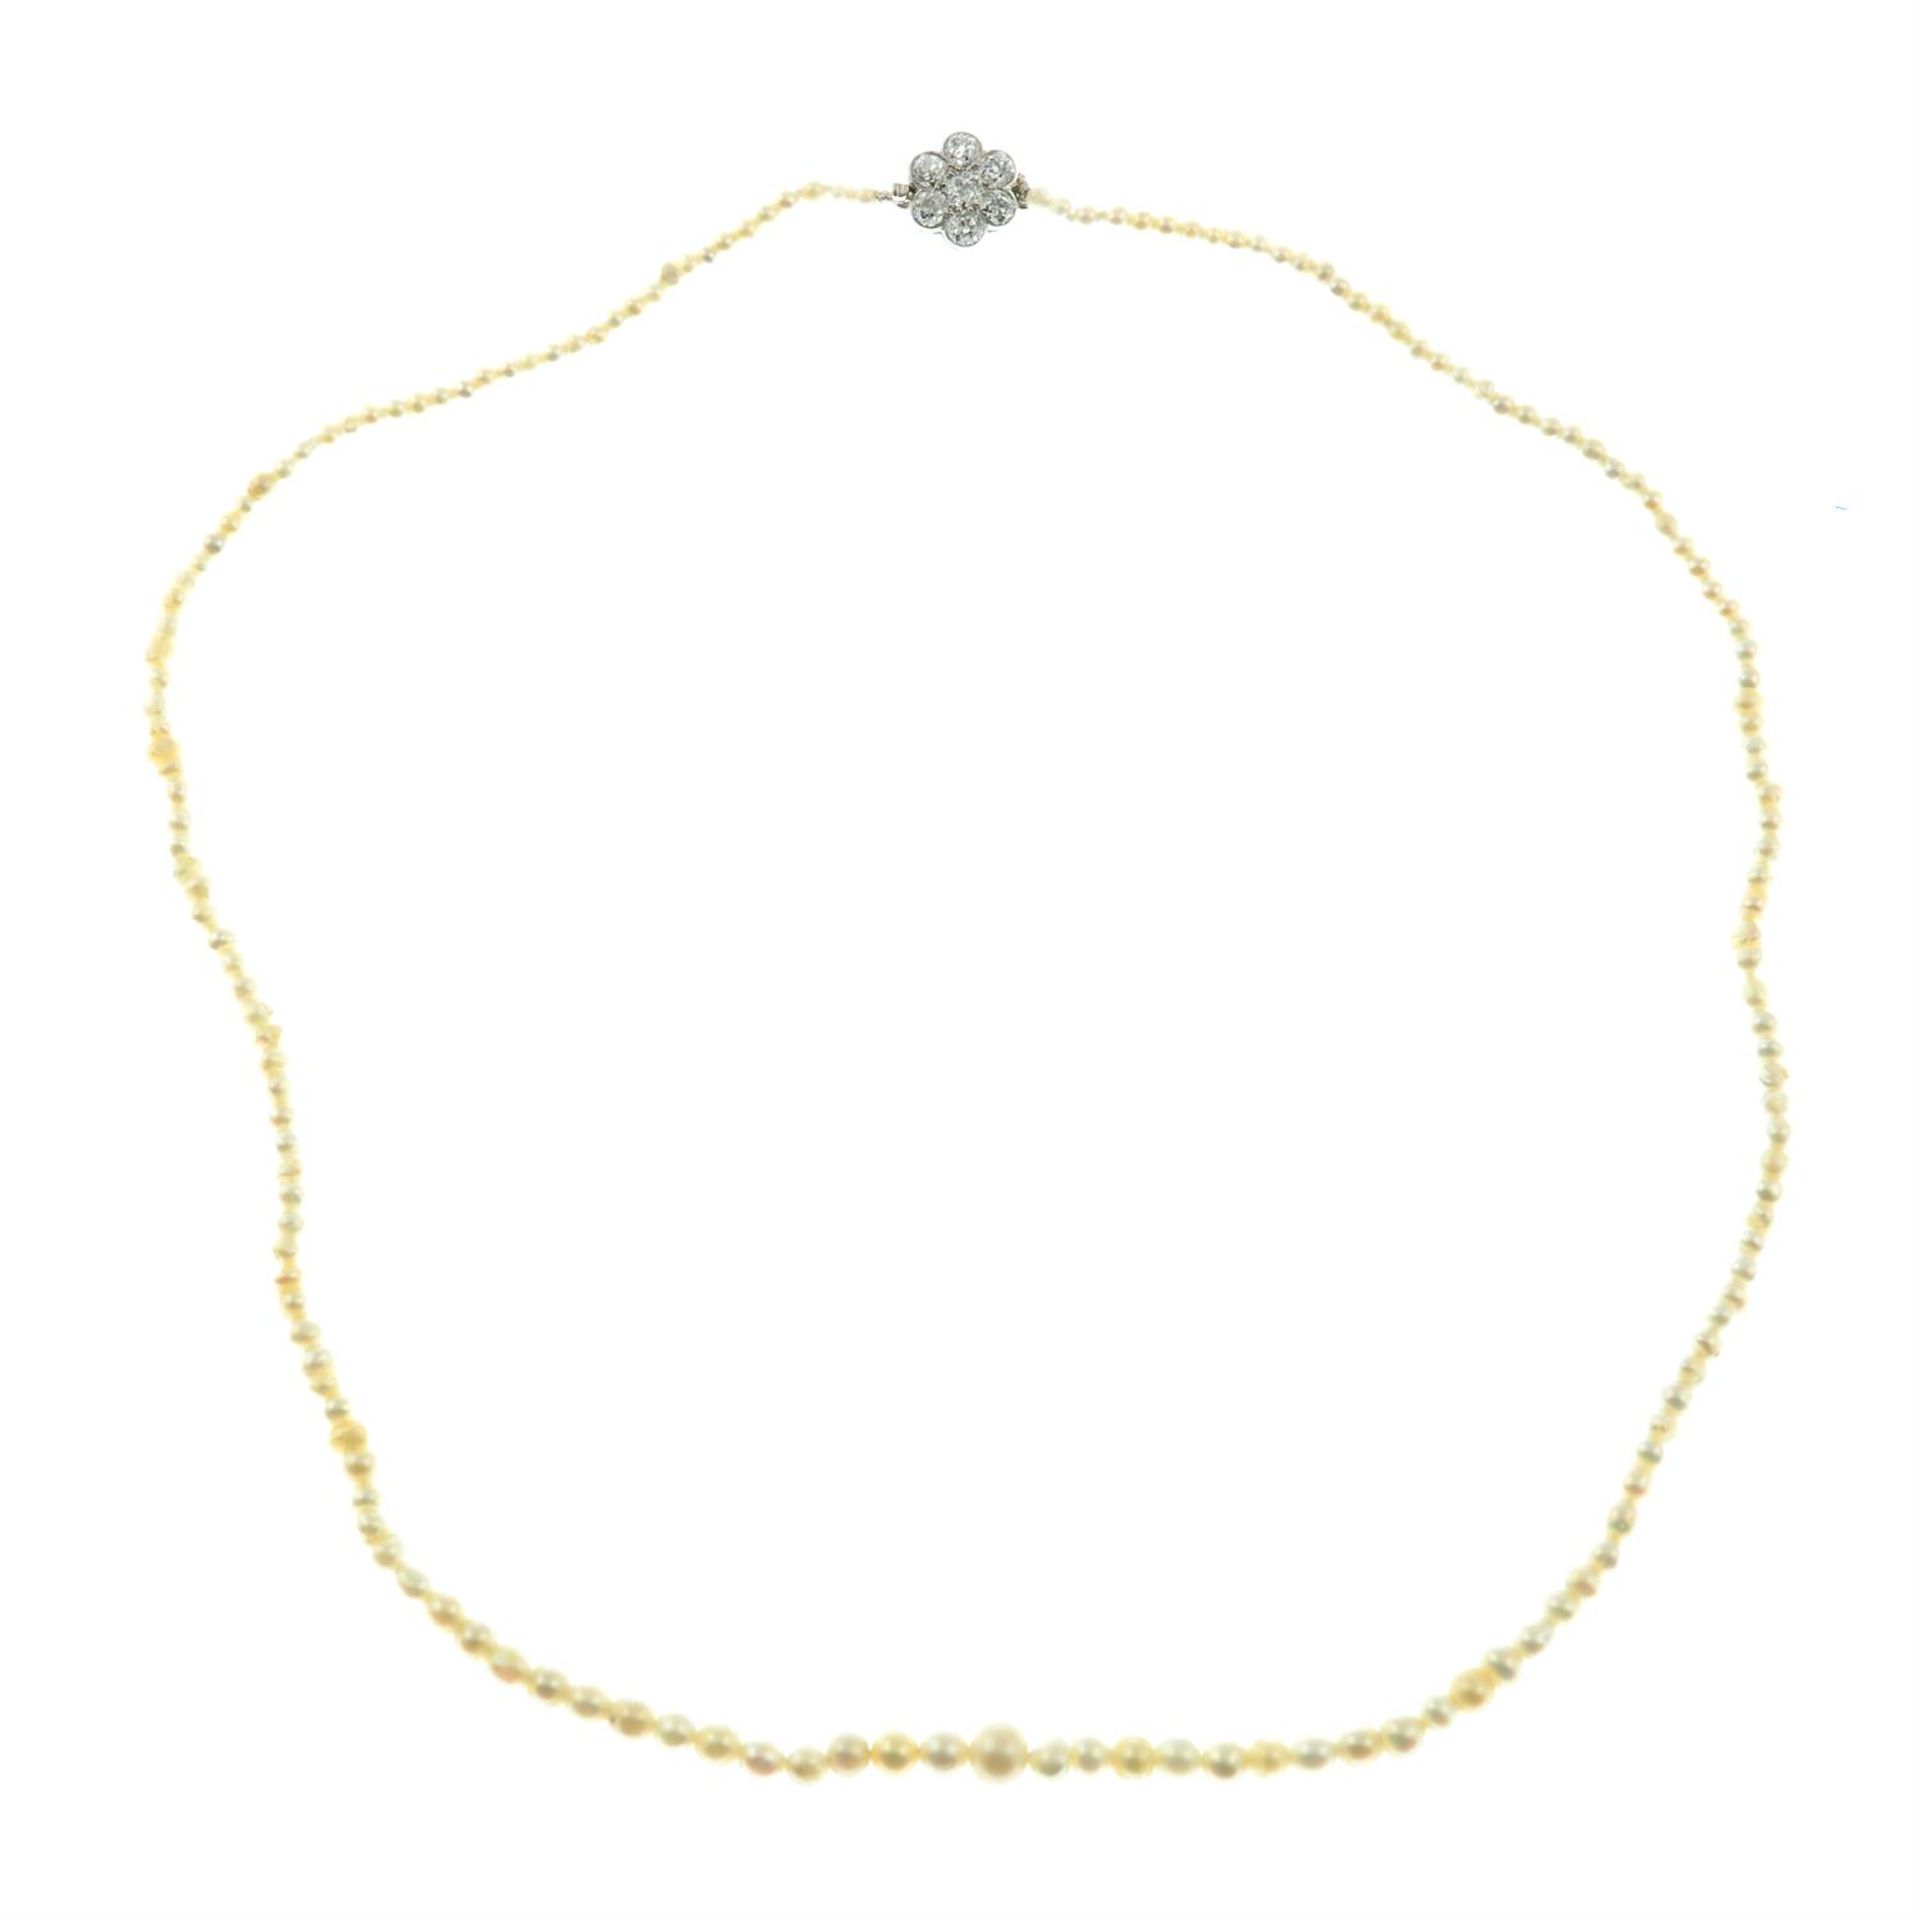 A natural pearl necklace, with old-cut diamond cluster clasp. - Image 2 of 5